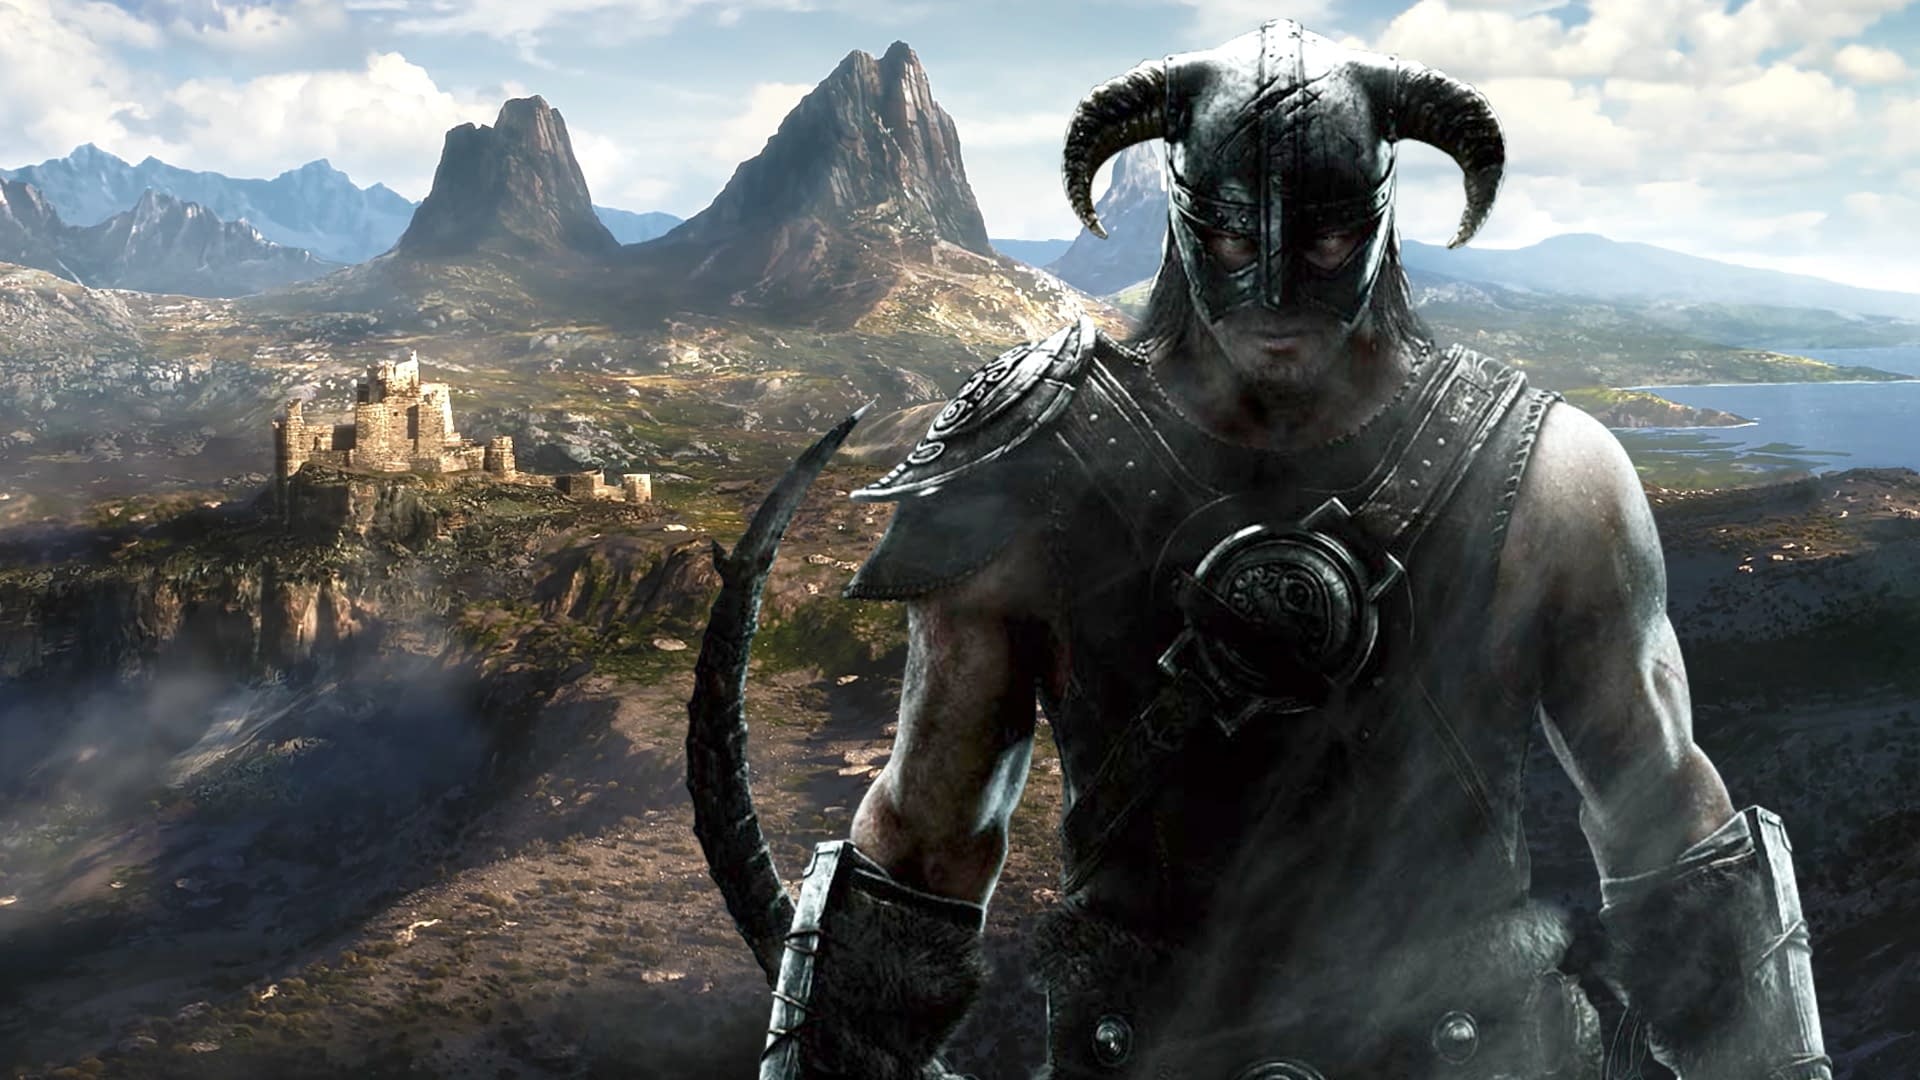 The Elder Scrolls 6 is reported to have a multiplayer fashion